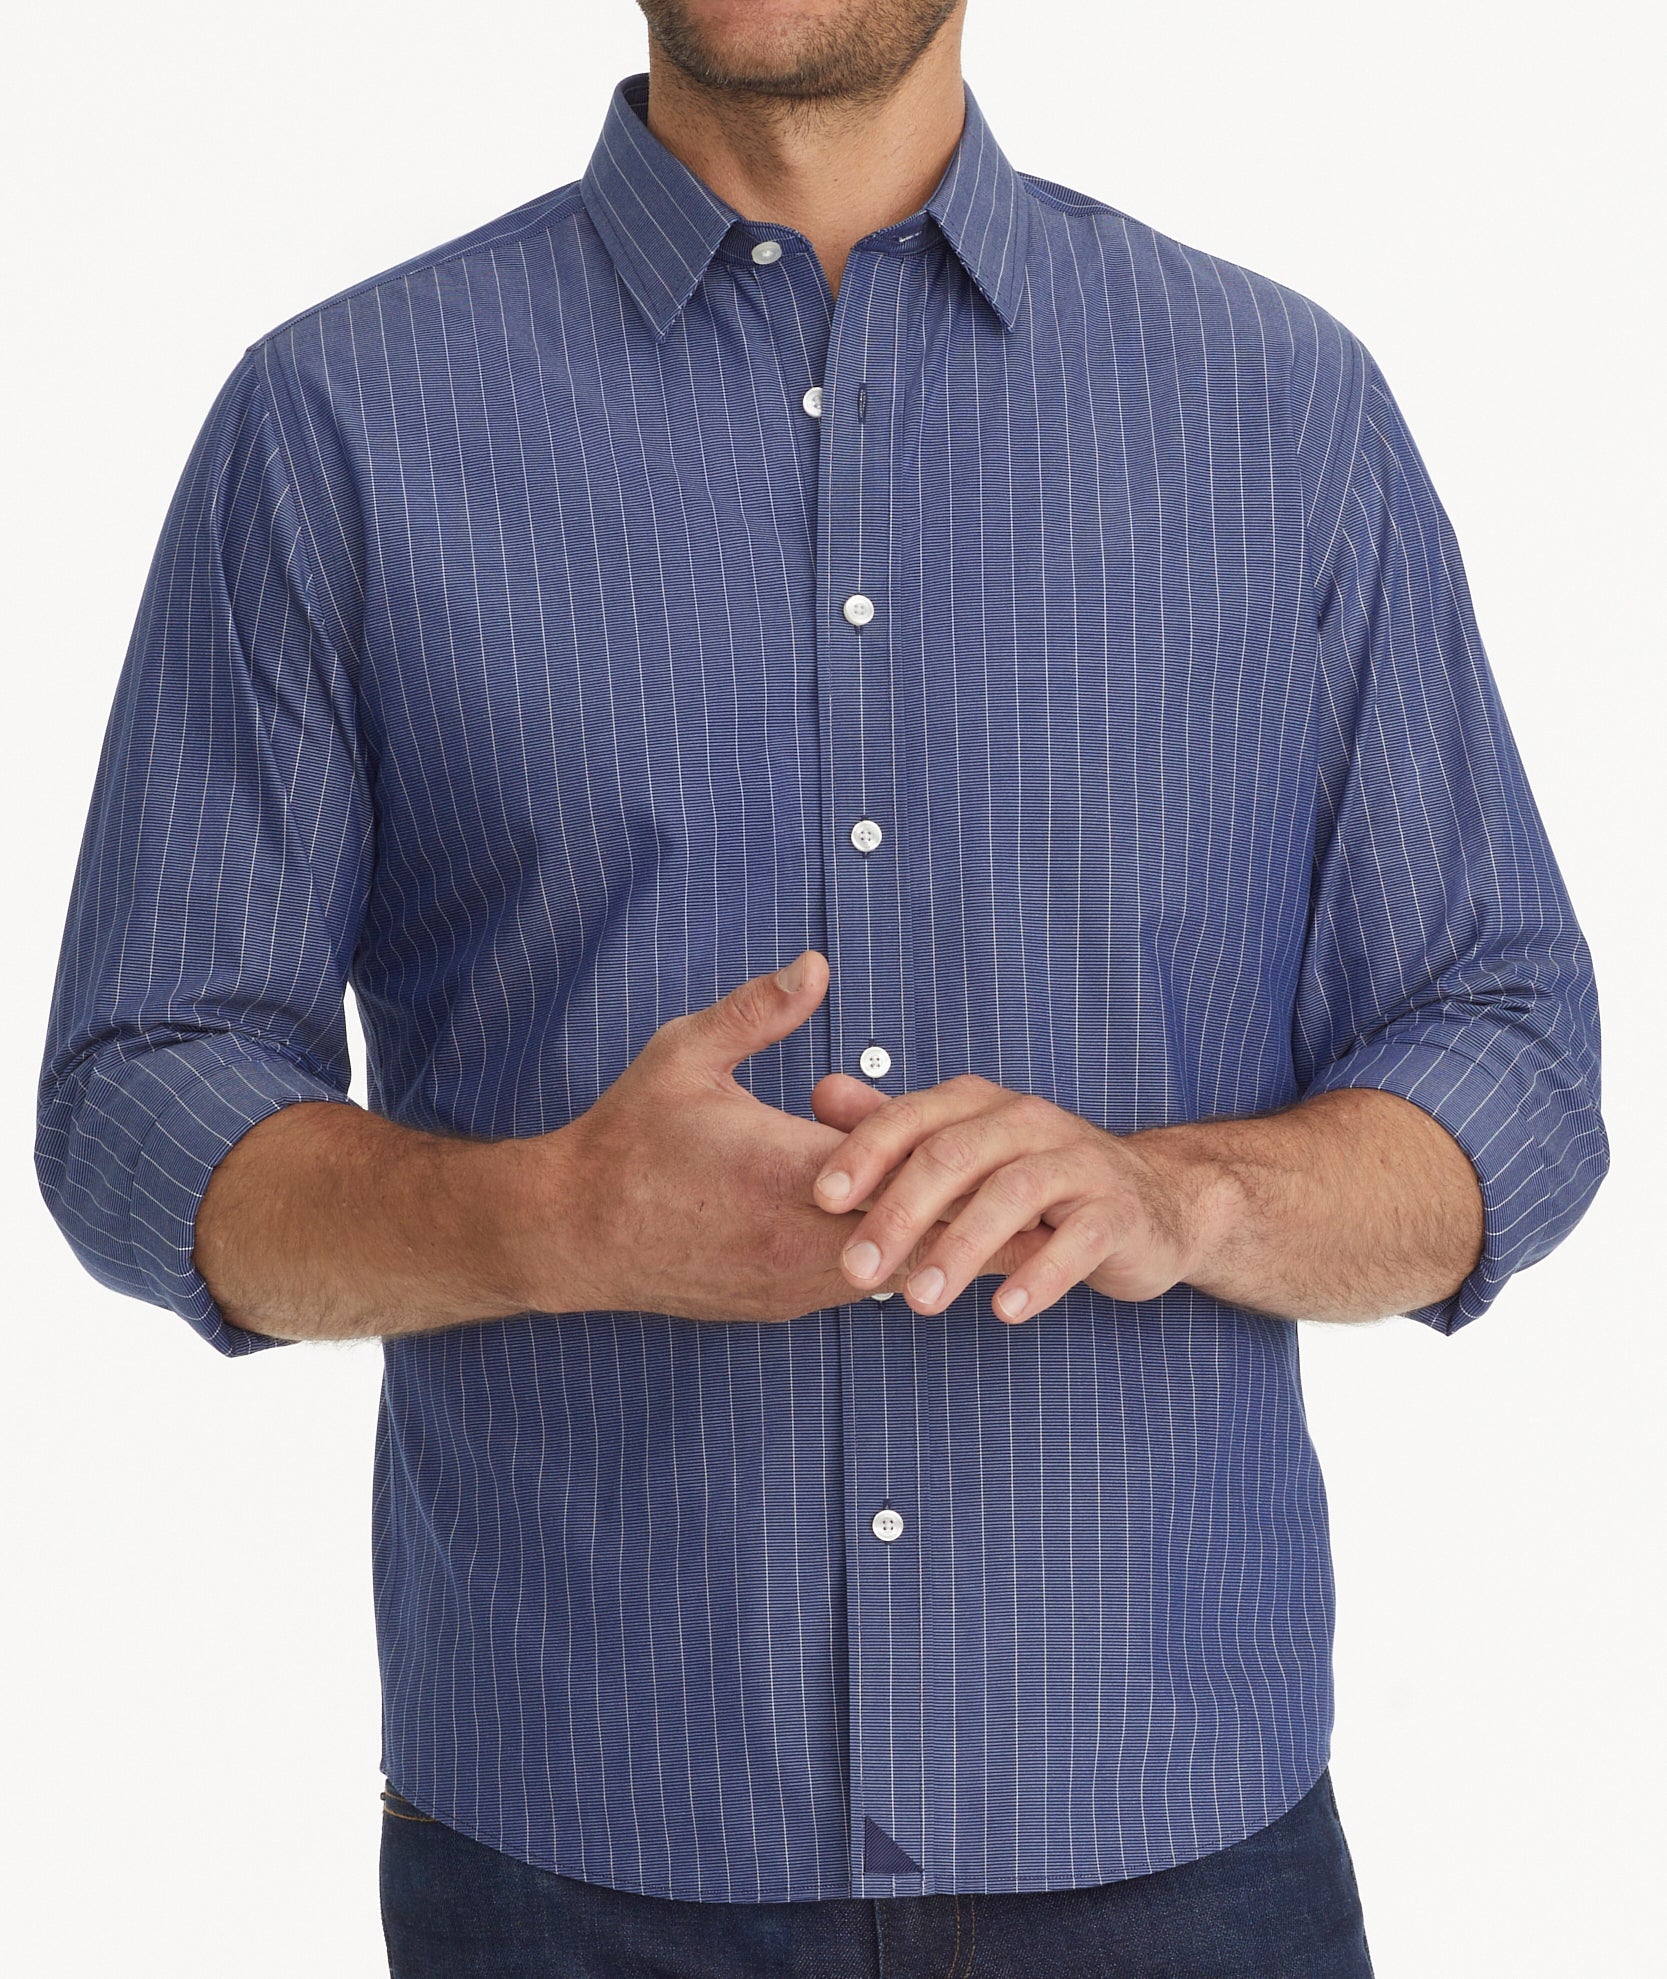 Stripe White Gifford Wrinkle-Free | Shirt Blue and UNTUCKit